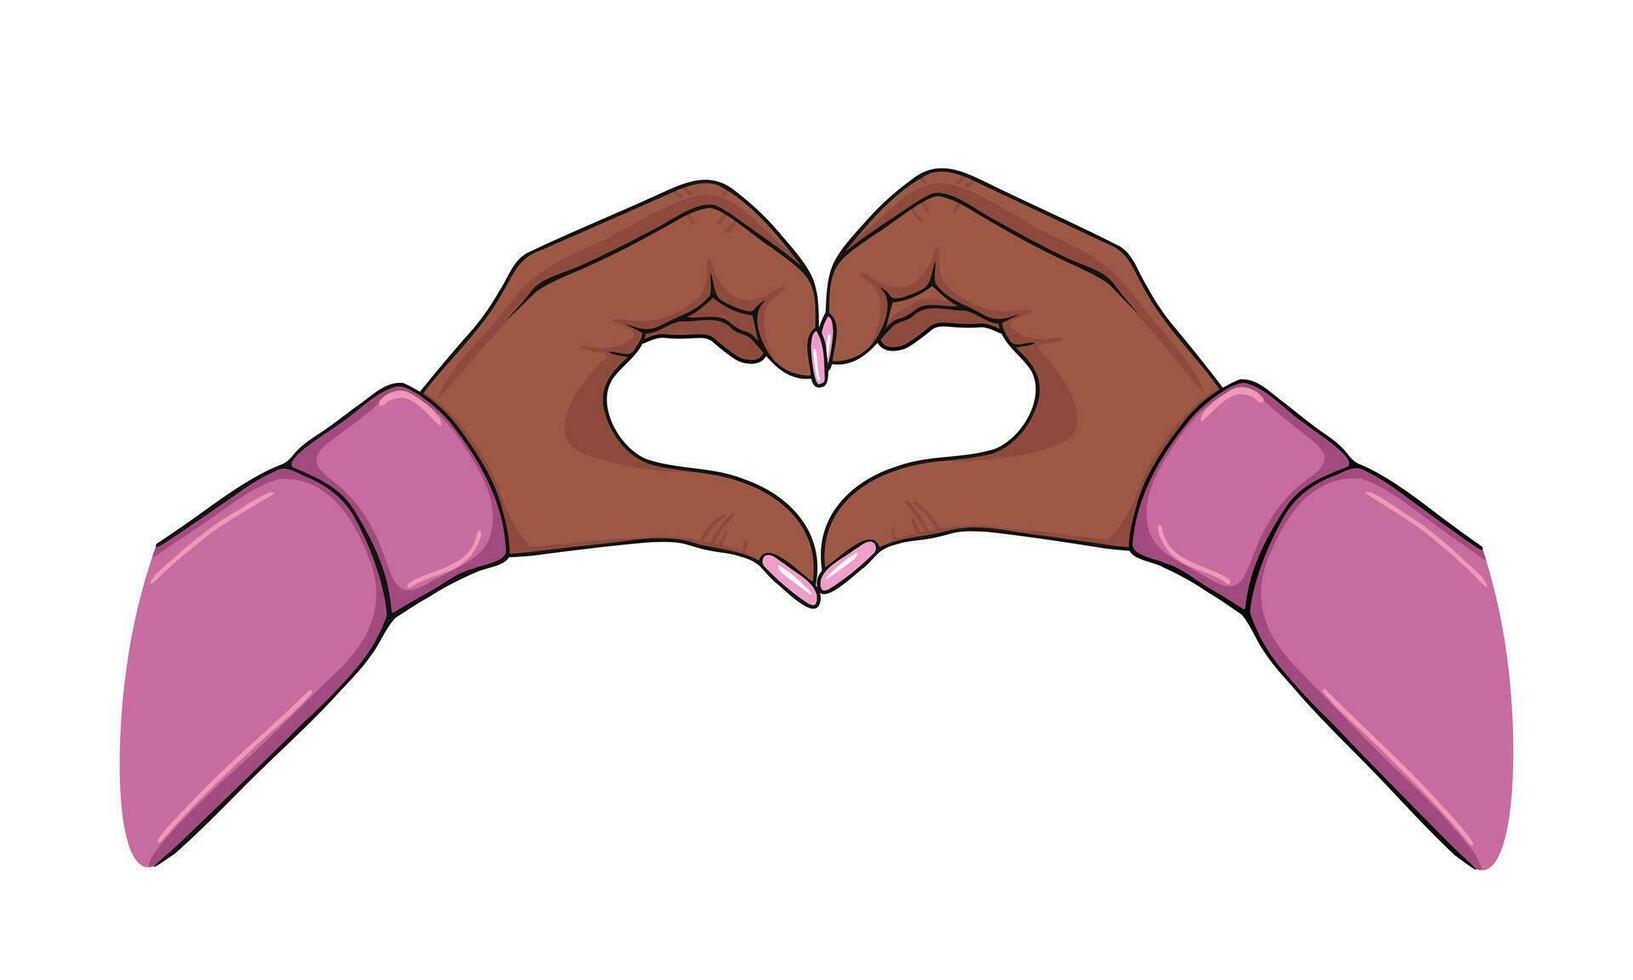 hands of american or african woman in shape heart. Illustration for backgrounds, covers and packaging. Image can be used for greeting cards, posters and stickers. Isolated on white background. vector